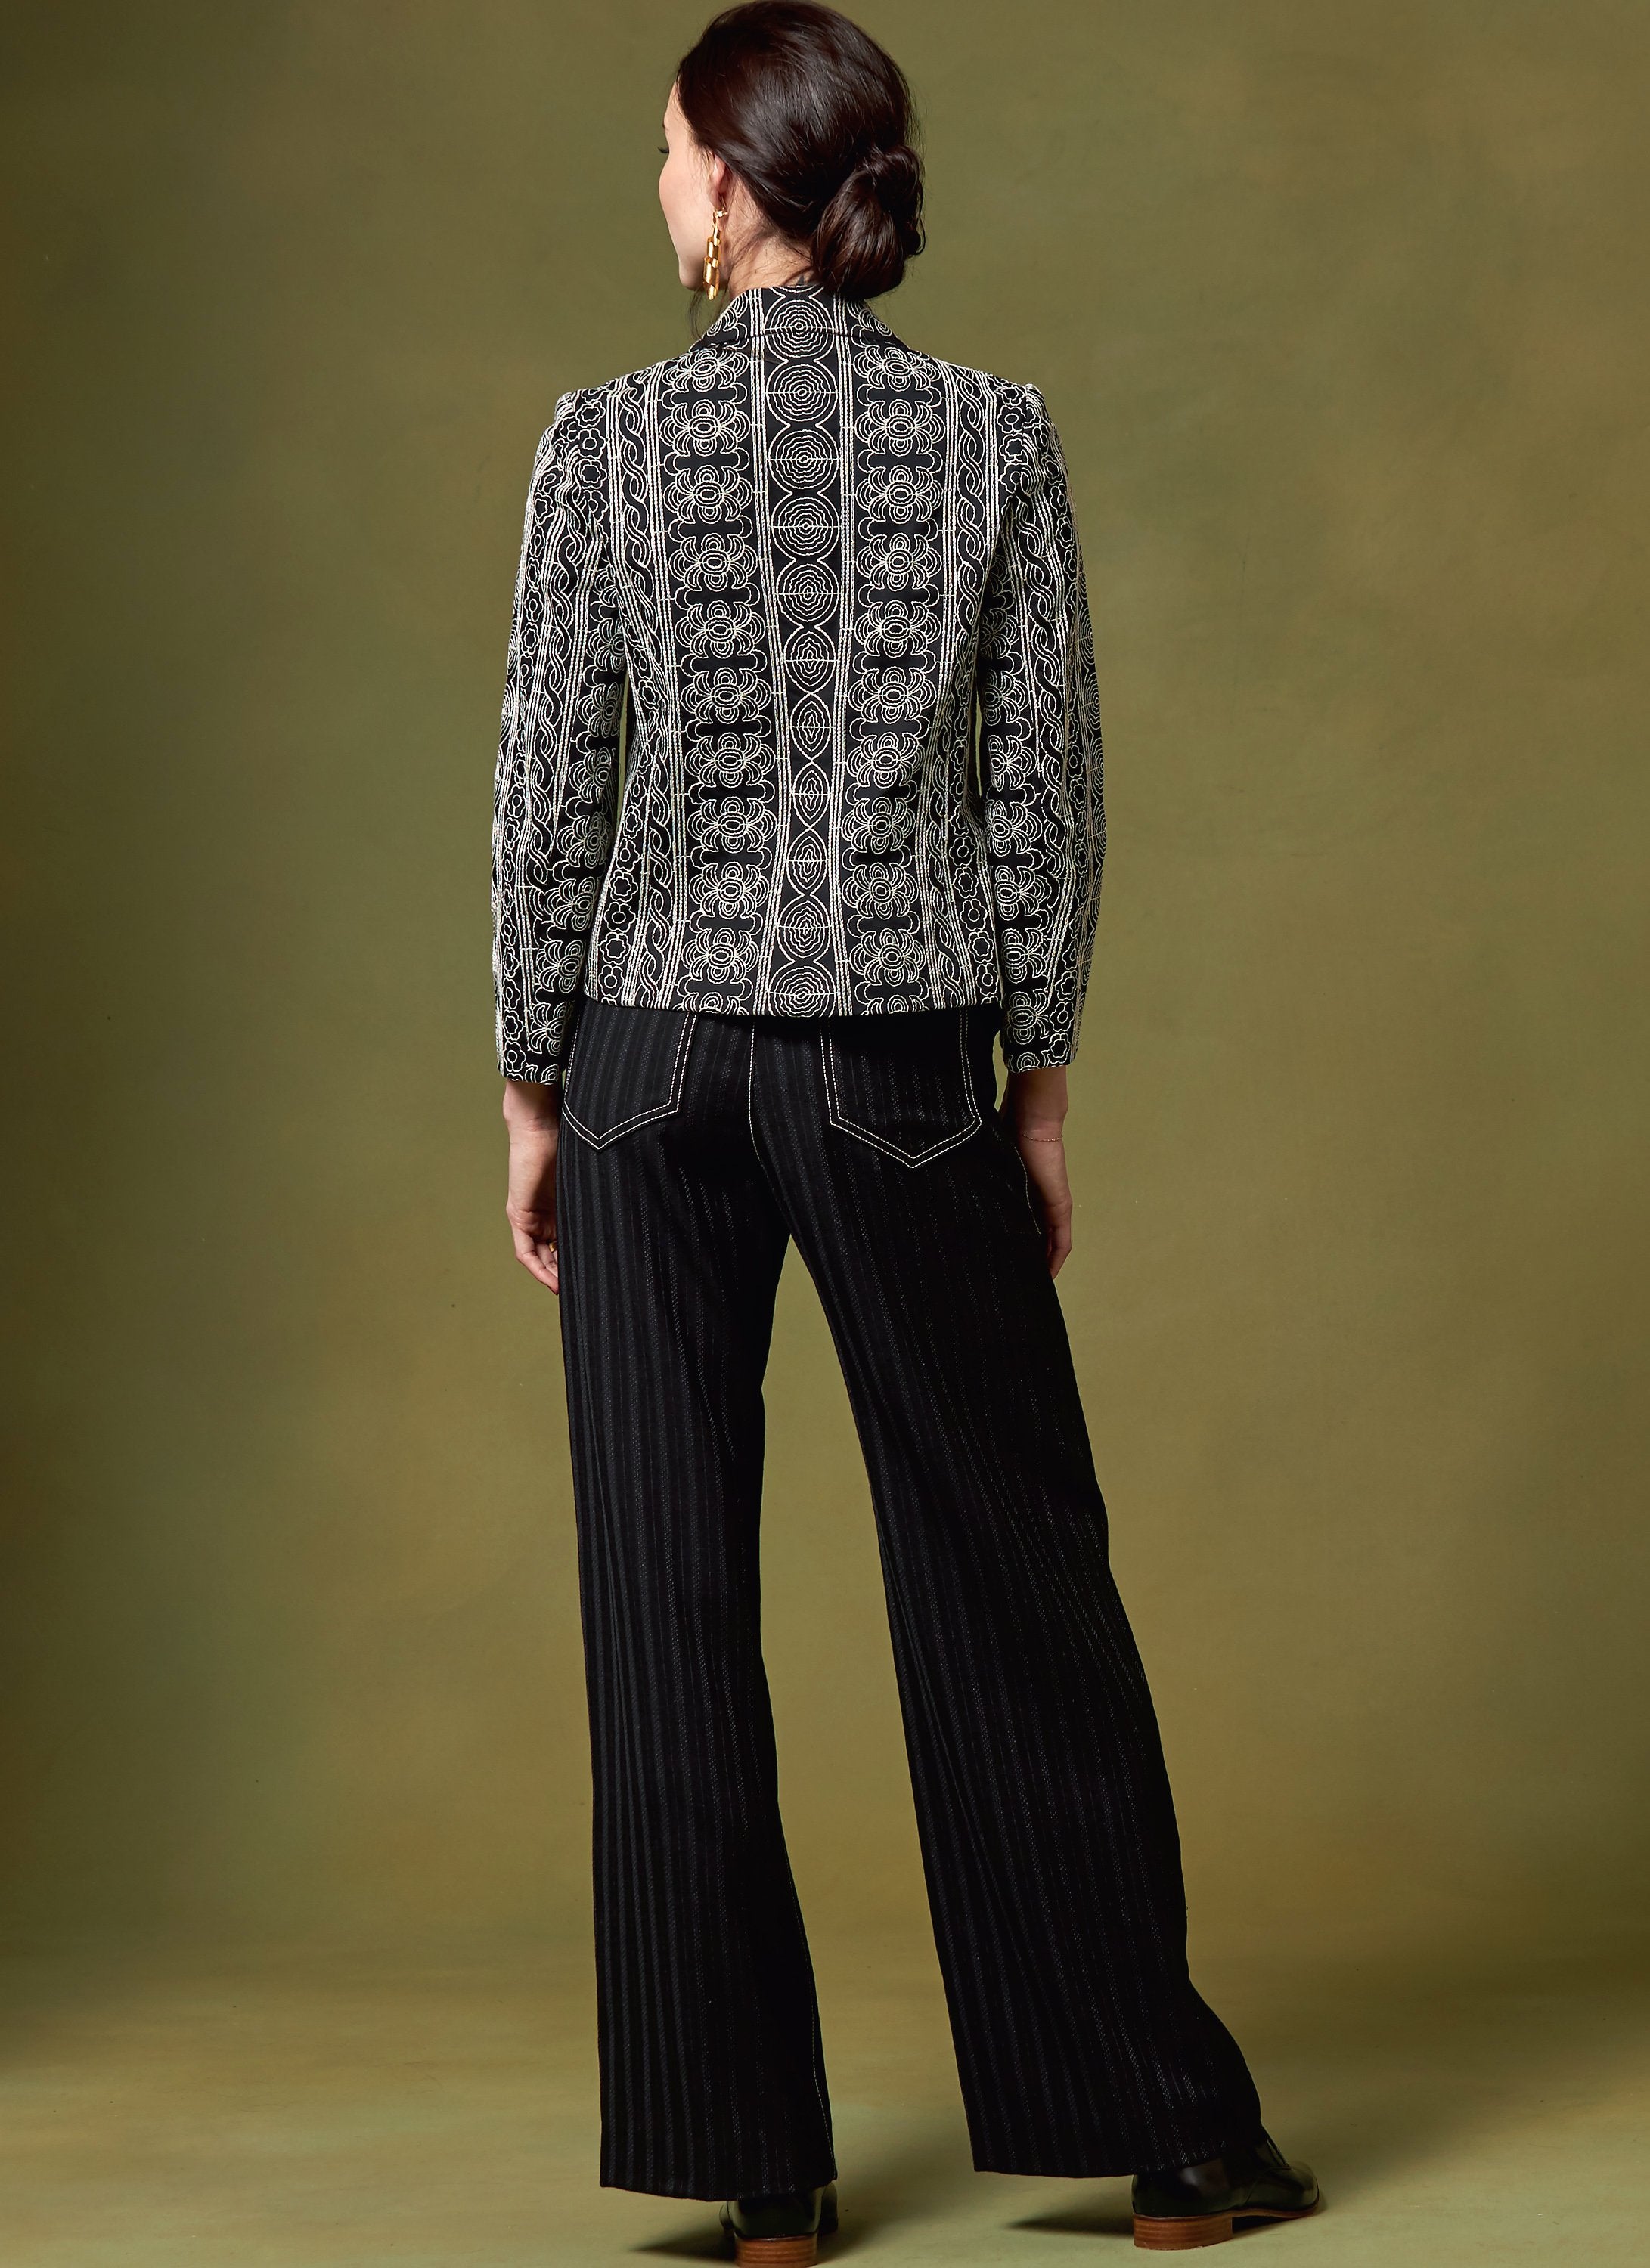 Vogue 1644 Misses' Jacket and Trousers pattern | Kathryn Brenne from Jaycotts Sewing Supplies